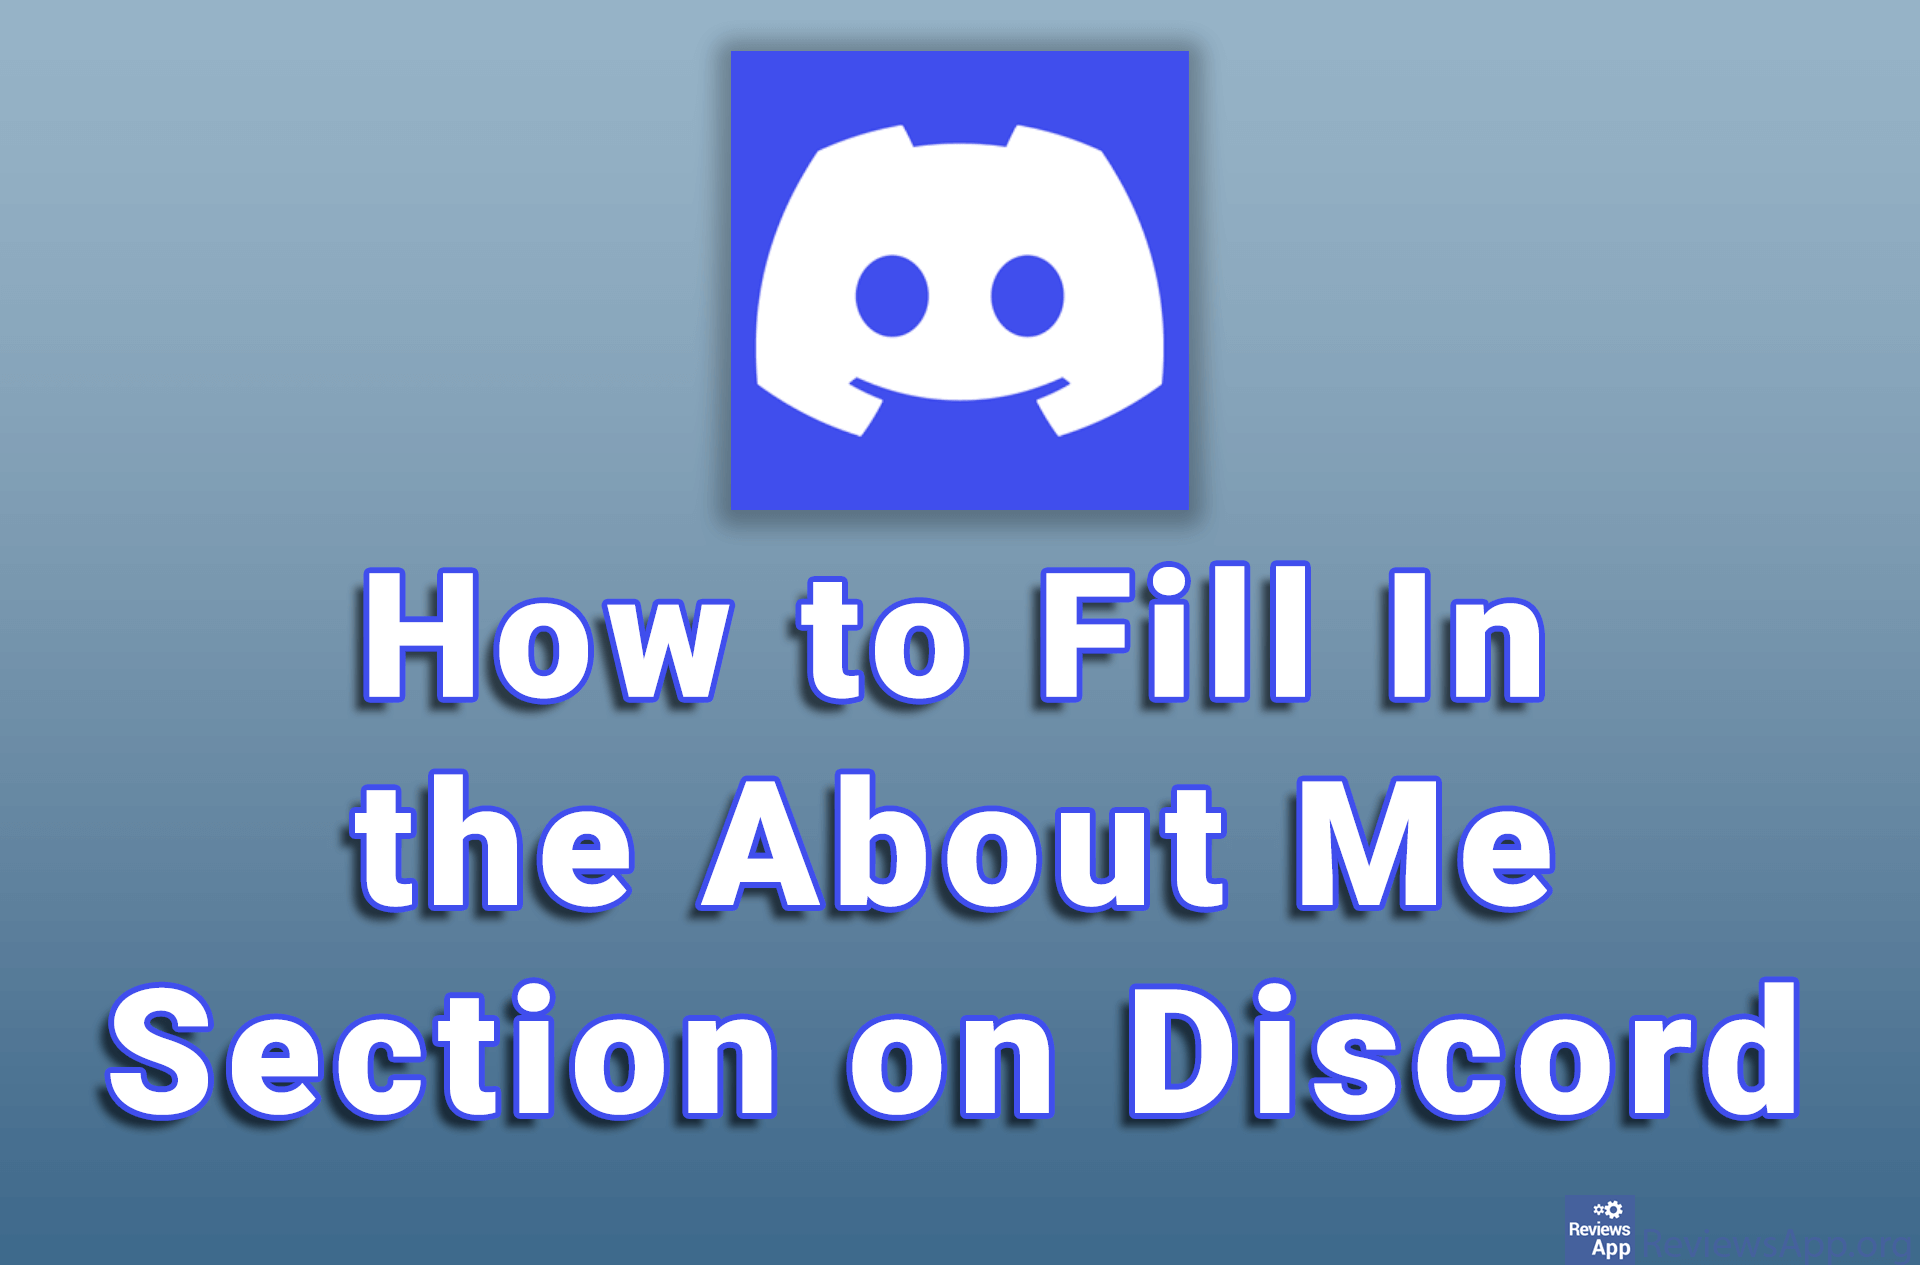 How to Fill In the About Me Section on Discord